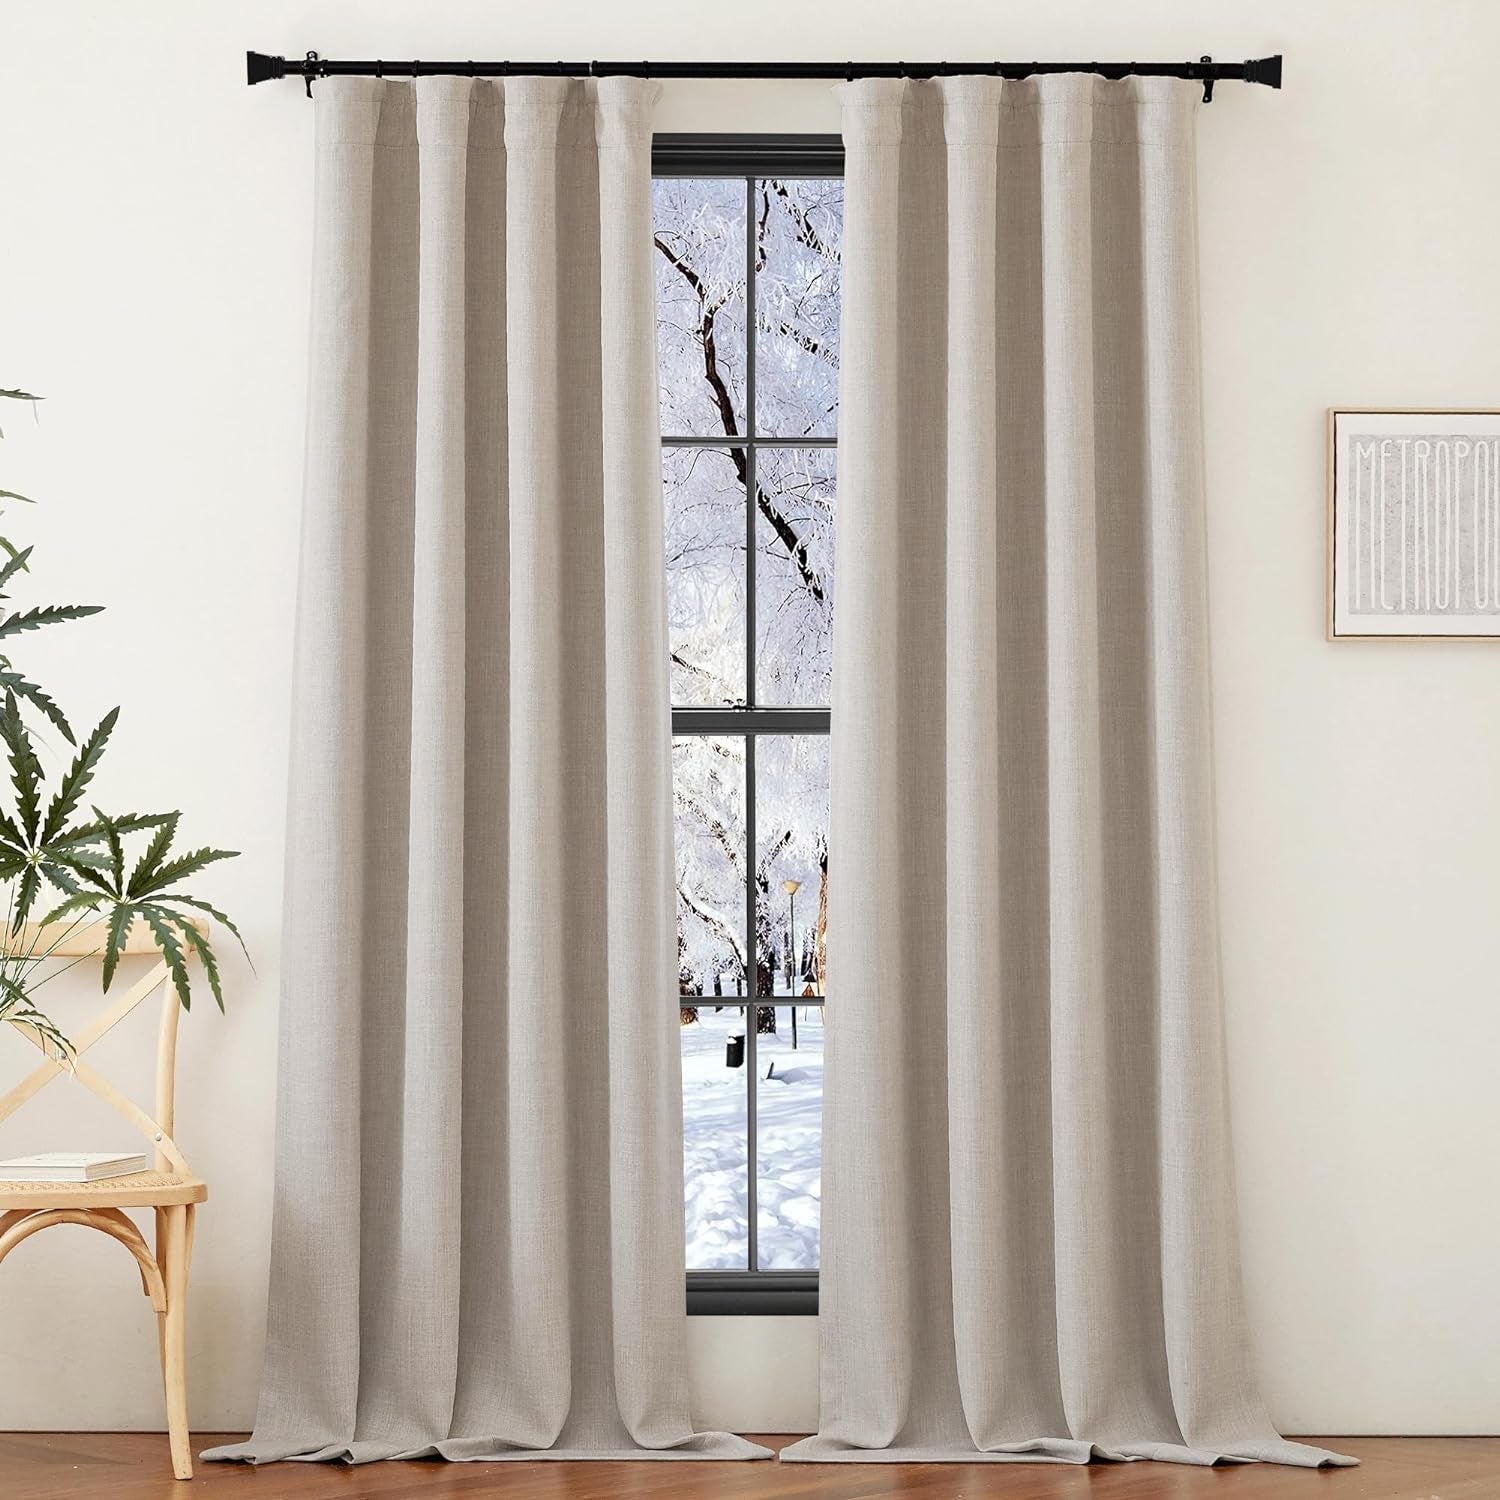 NICETOWN Faux Linen Room Darkening Curtains & Drapes for Living Room, Dual Rod Pockets & Hook Belt Heat/Light Blocking Window Treatments Thermal Drapes for Bedroom, Angora, W52 X L84, 2 Panels  NICETOWN   